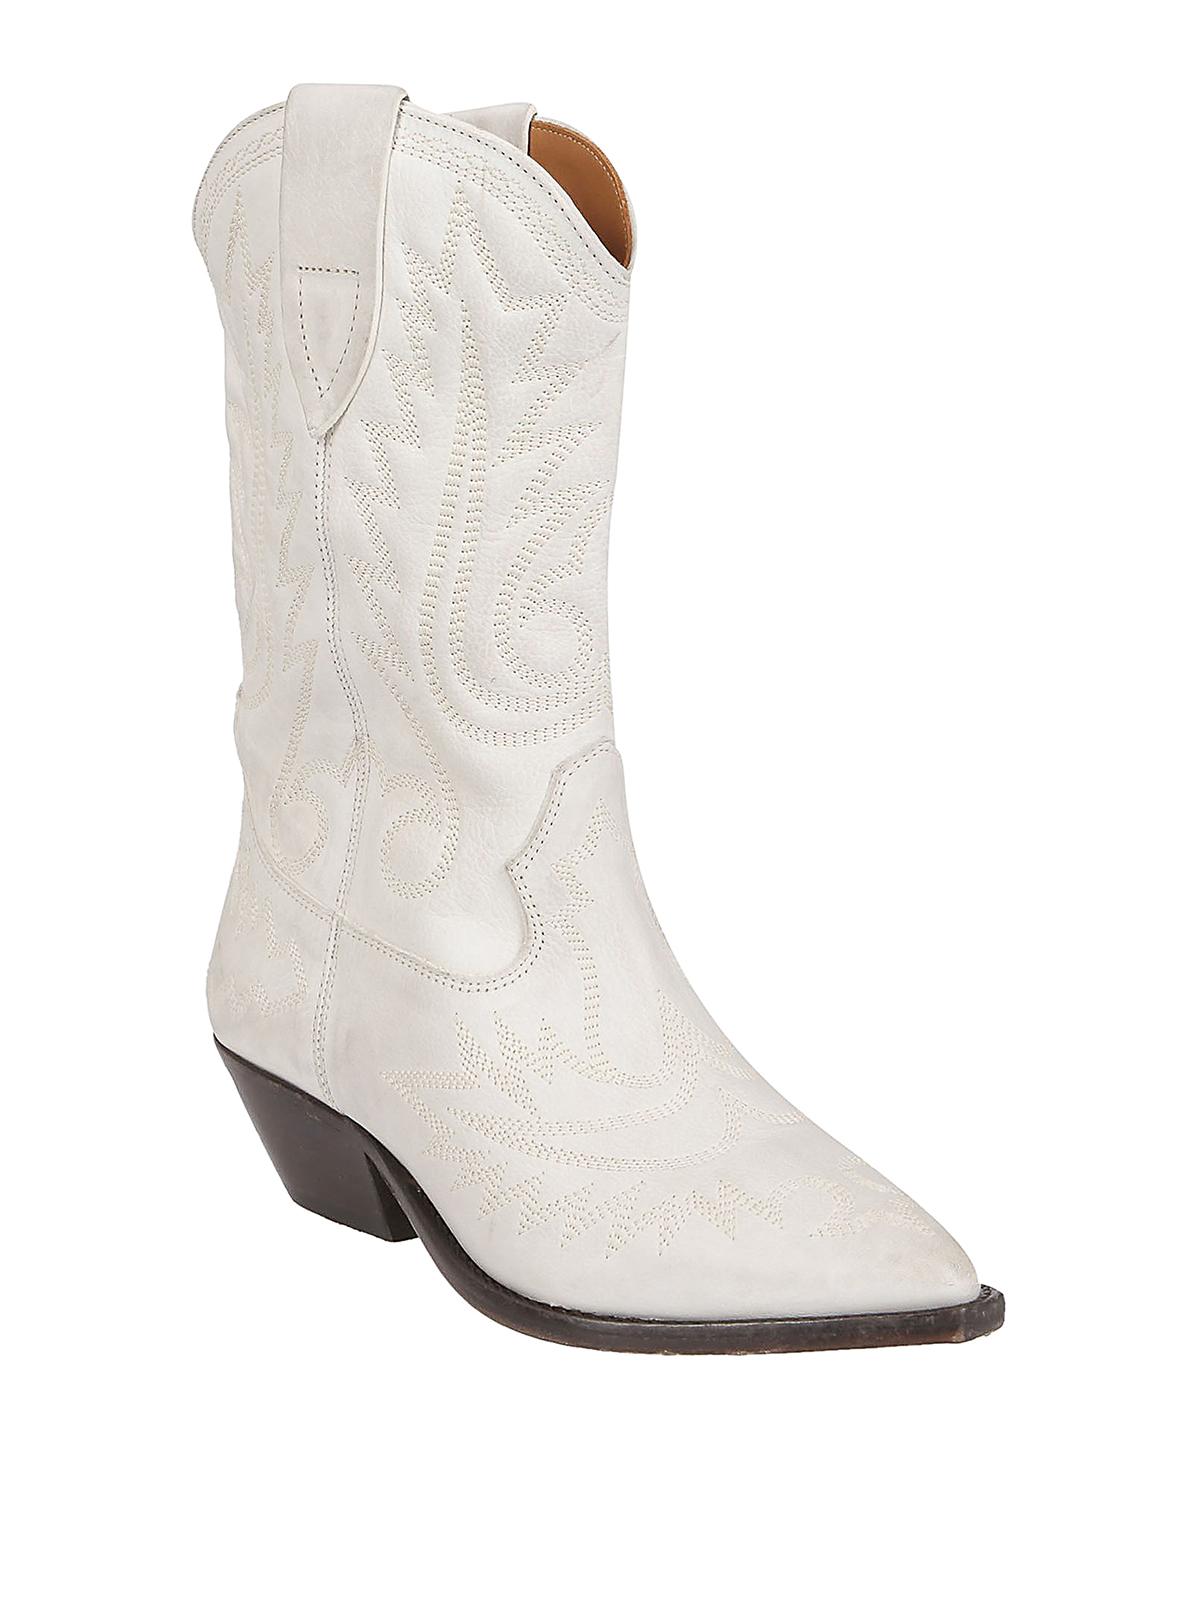 Duerto Texan Ankle Boots in White 